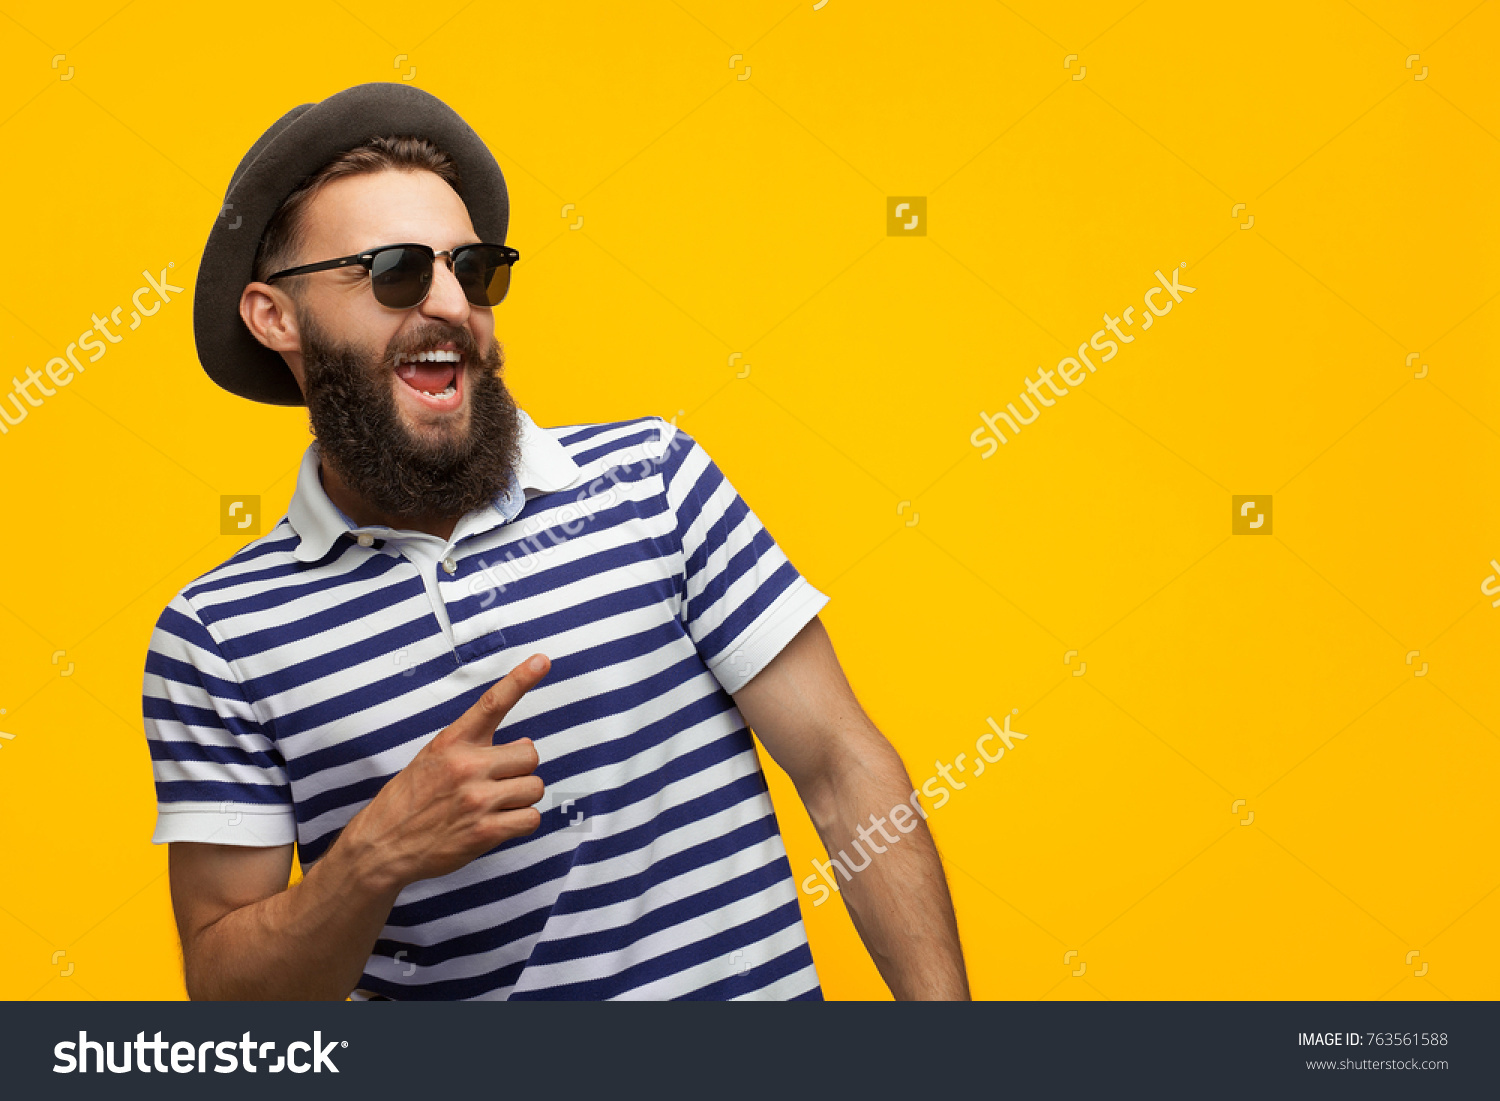 Young bearded hipster in cap and sunglasses pointing happily away on orange background.  #763561588